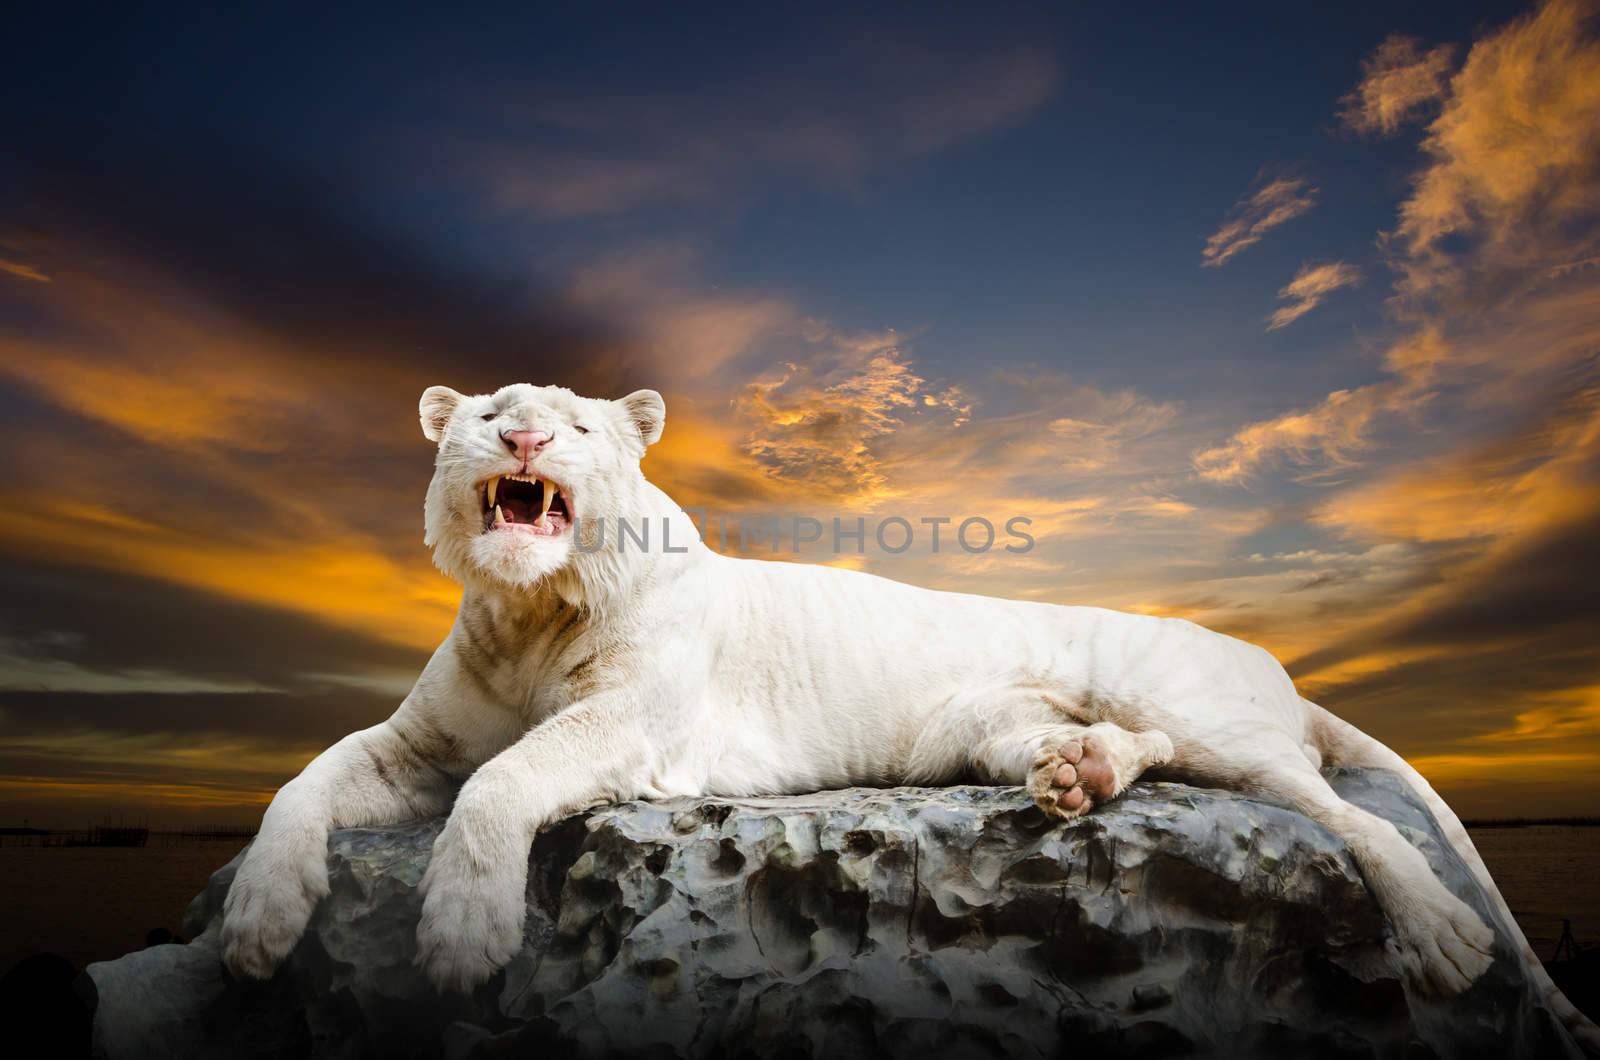 The white Tiger by Gamjai